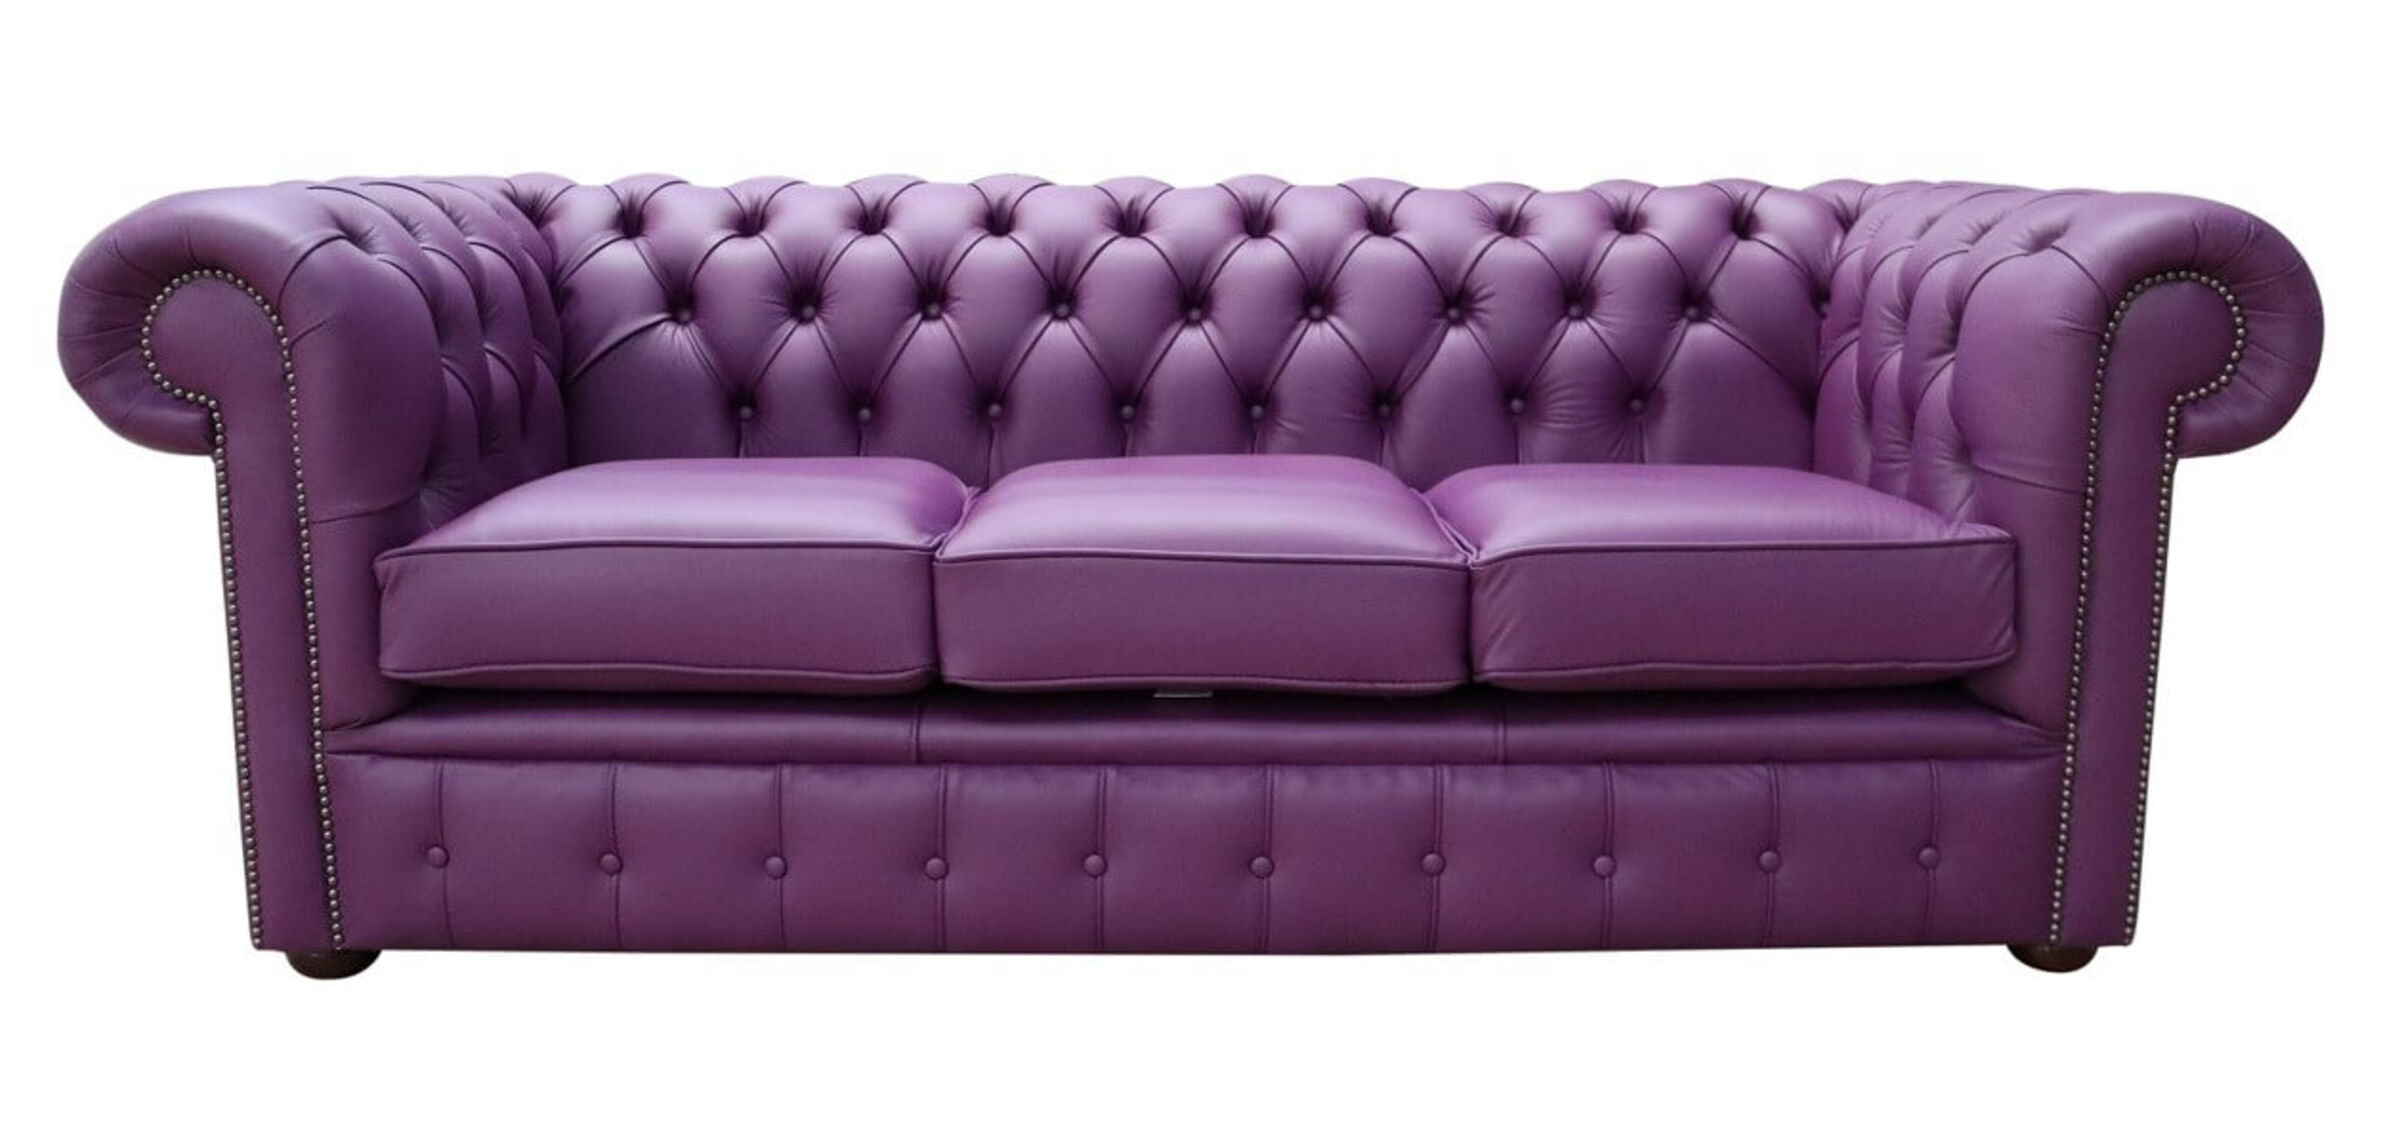 purple chesterfield sofa bed